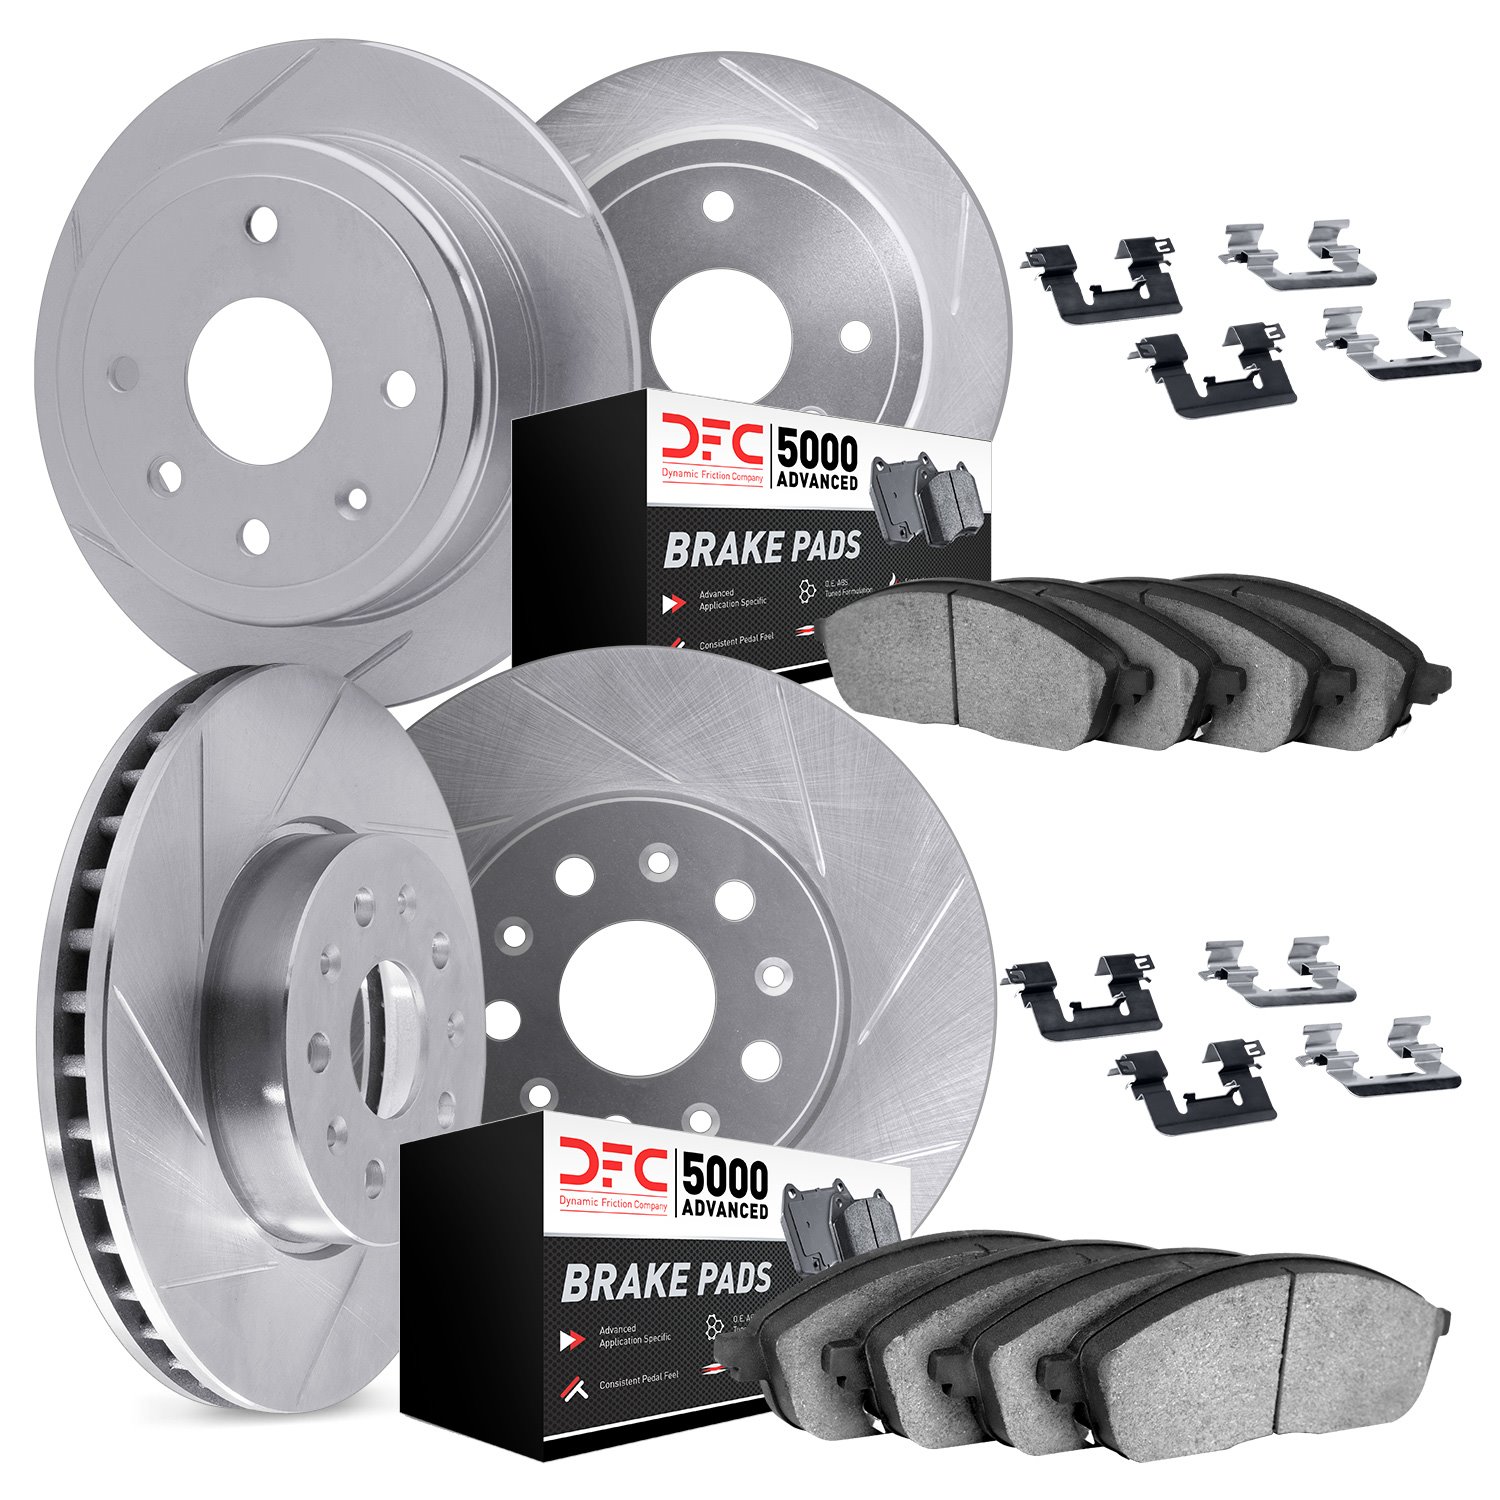 5514-45011 Slotted Brake Rotors w/5000 Advanced Brake Pads Kit & Hardware [Silver], 2002-2007 GM, Position: Front and Rear